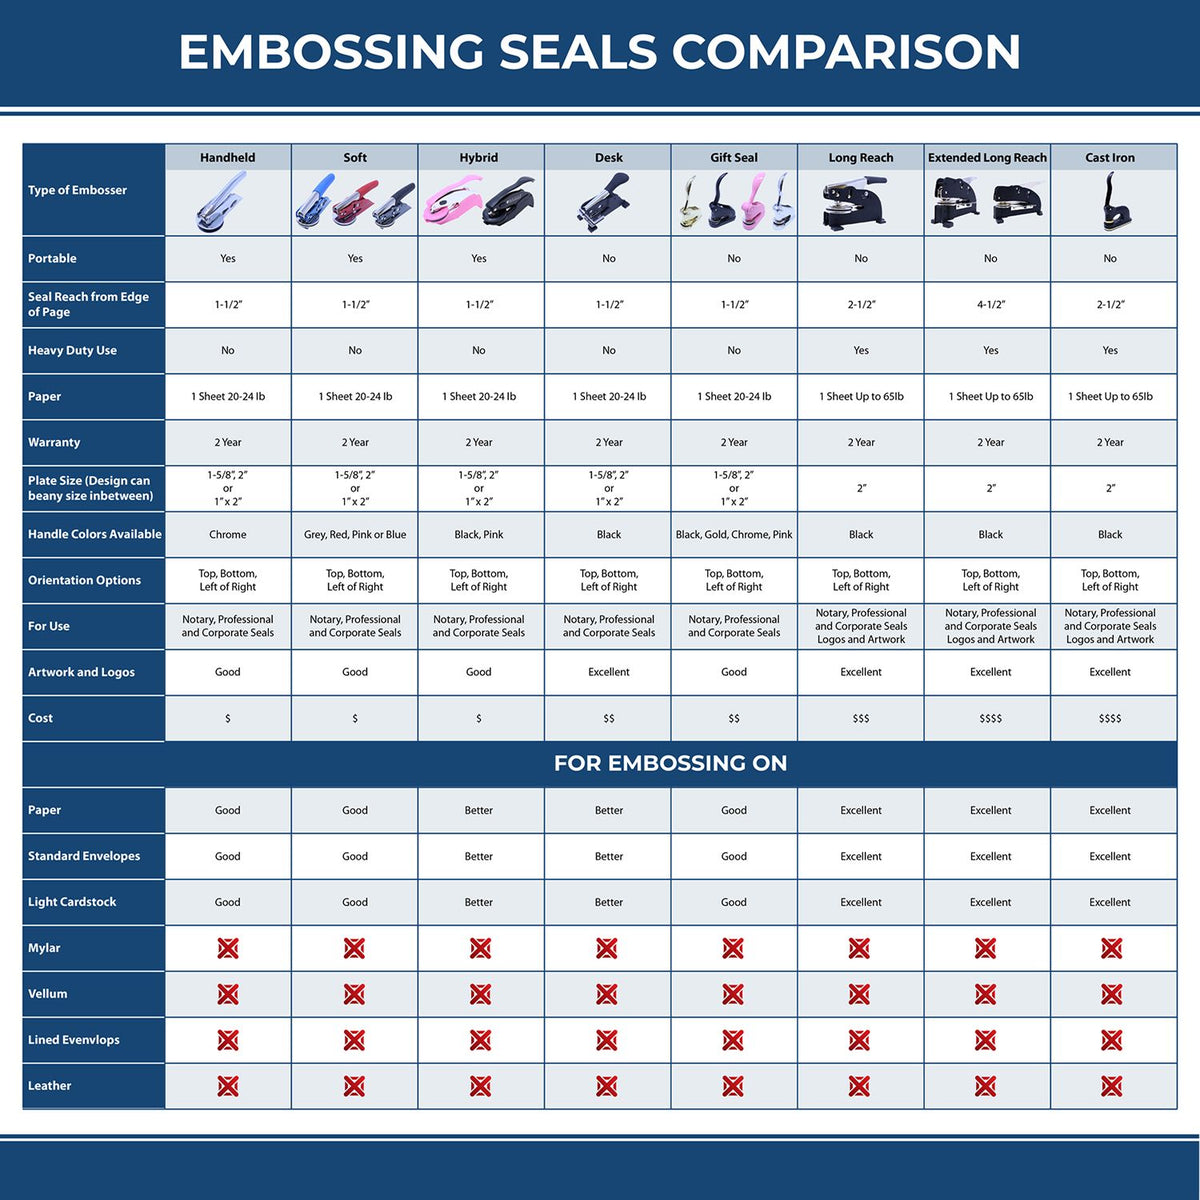 A comparison chart for the different types of mount models available for the Soft Pocket Illinois Landscape Architect Embosser.